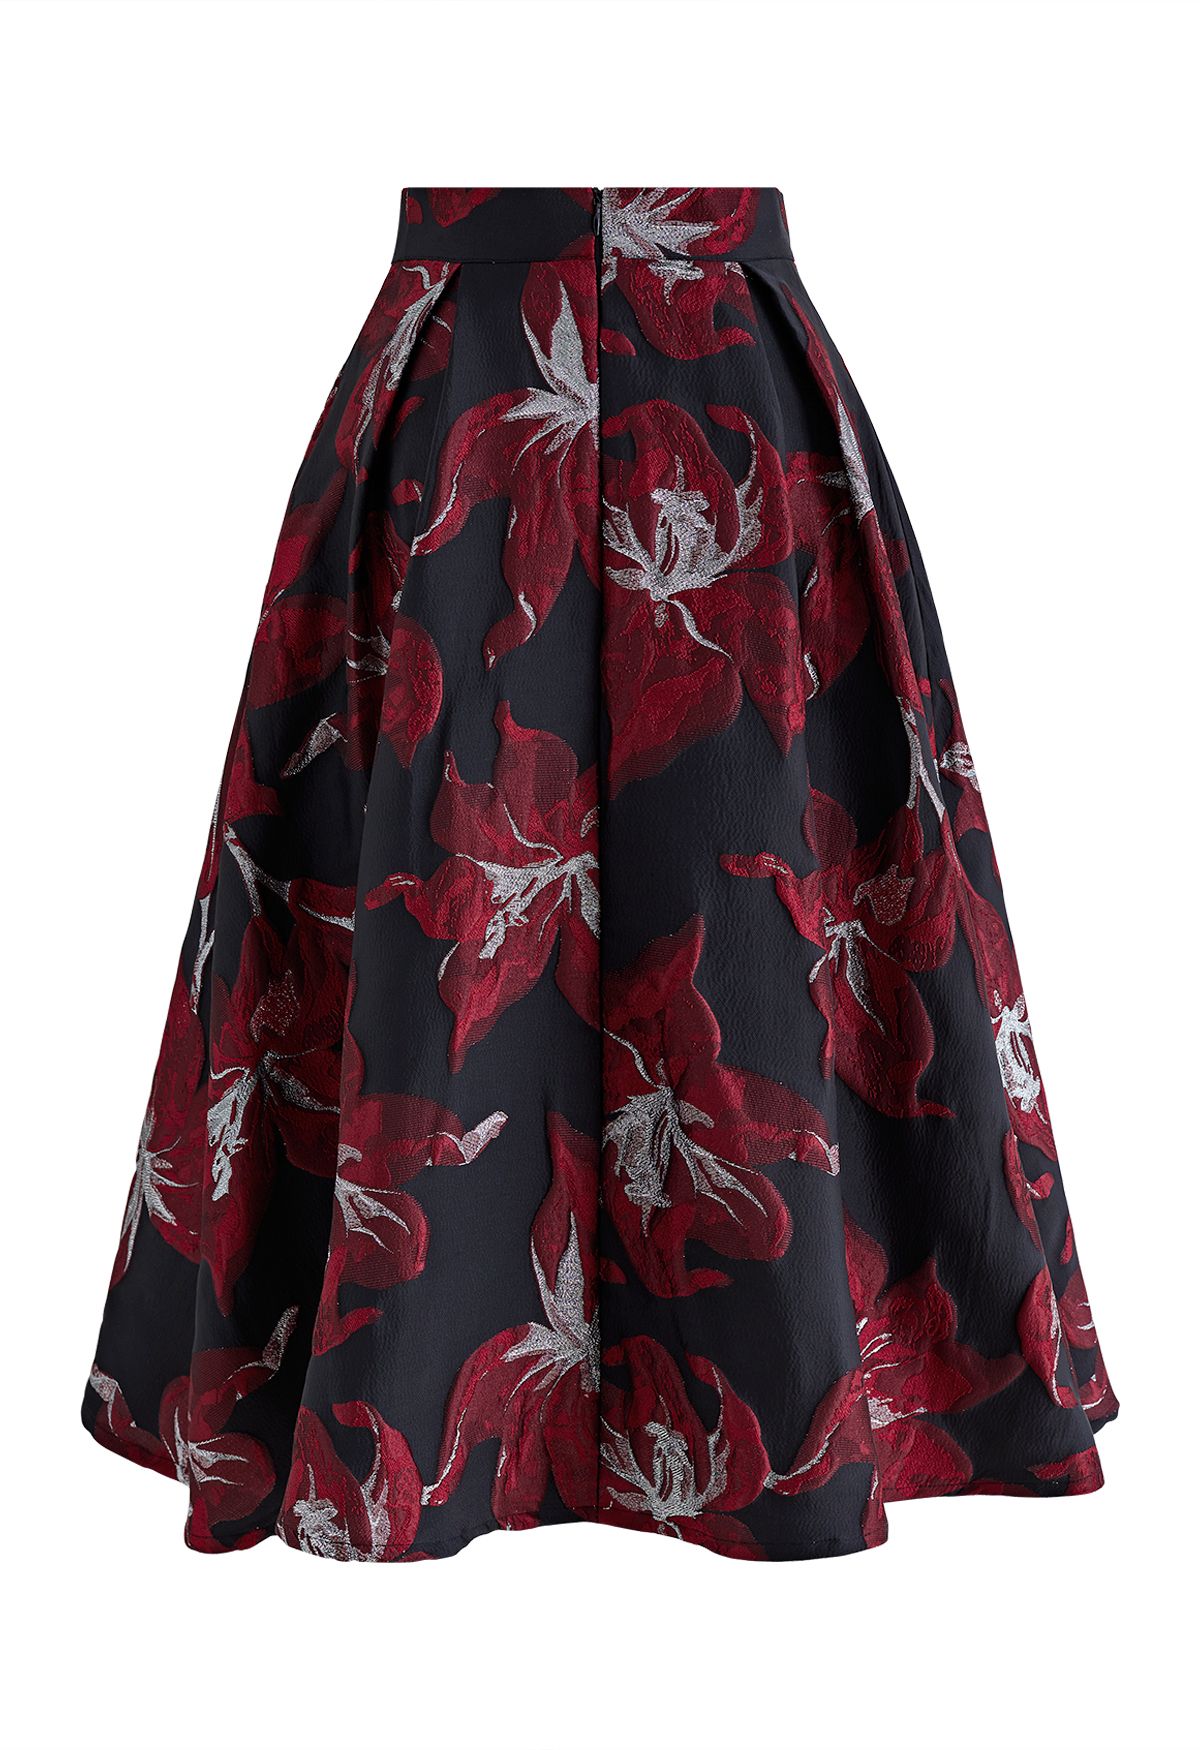 Lily Blossom Metallic Jacquard Midi Skirt in Red - Retro, Indie and ...